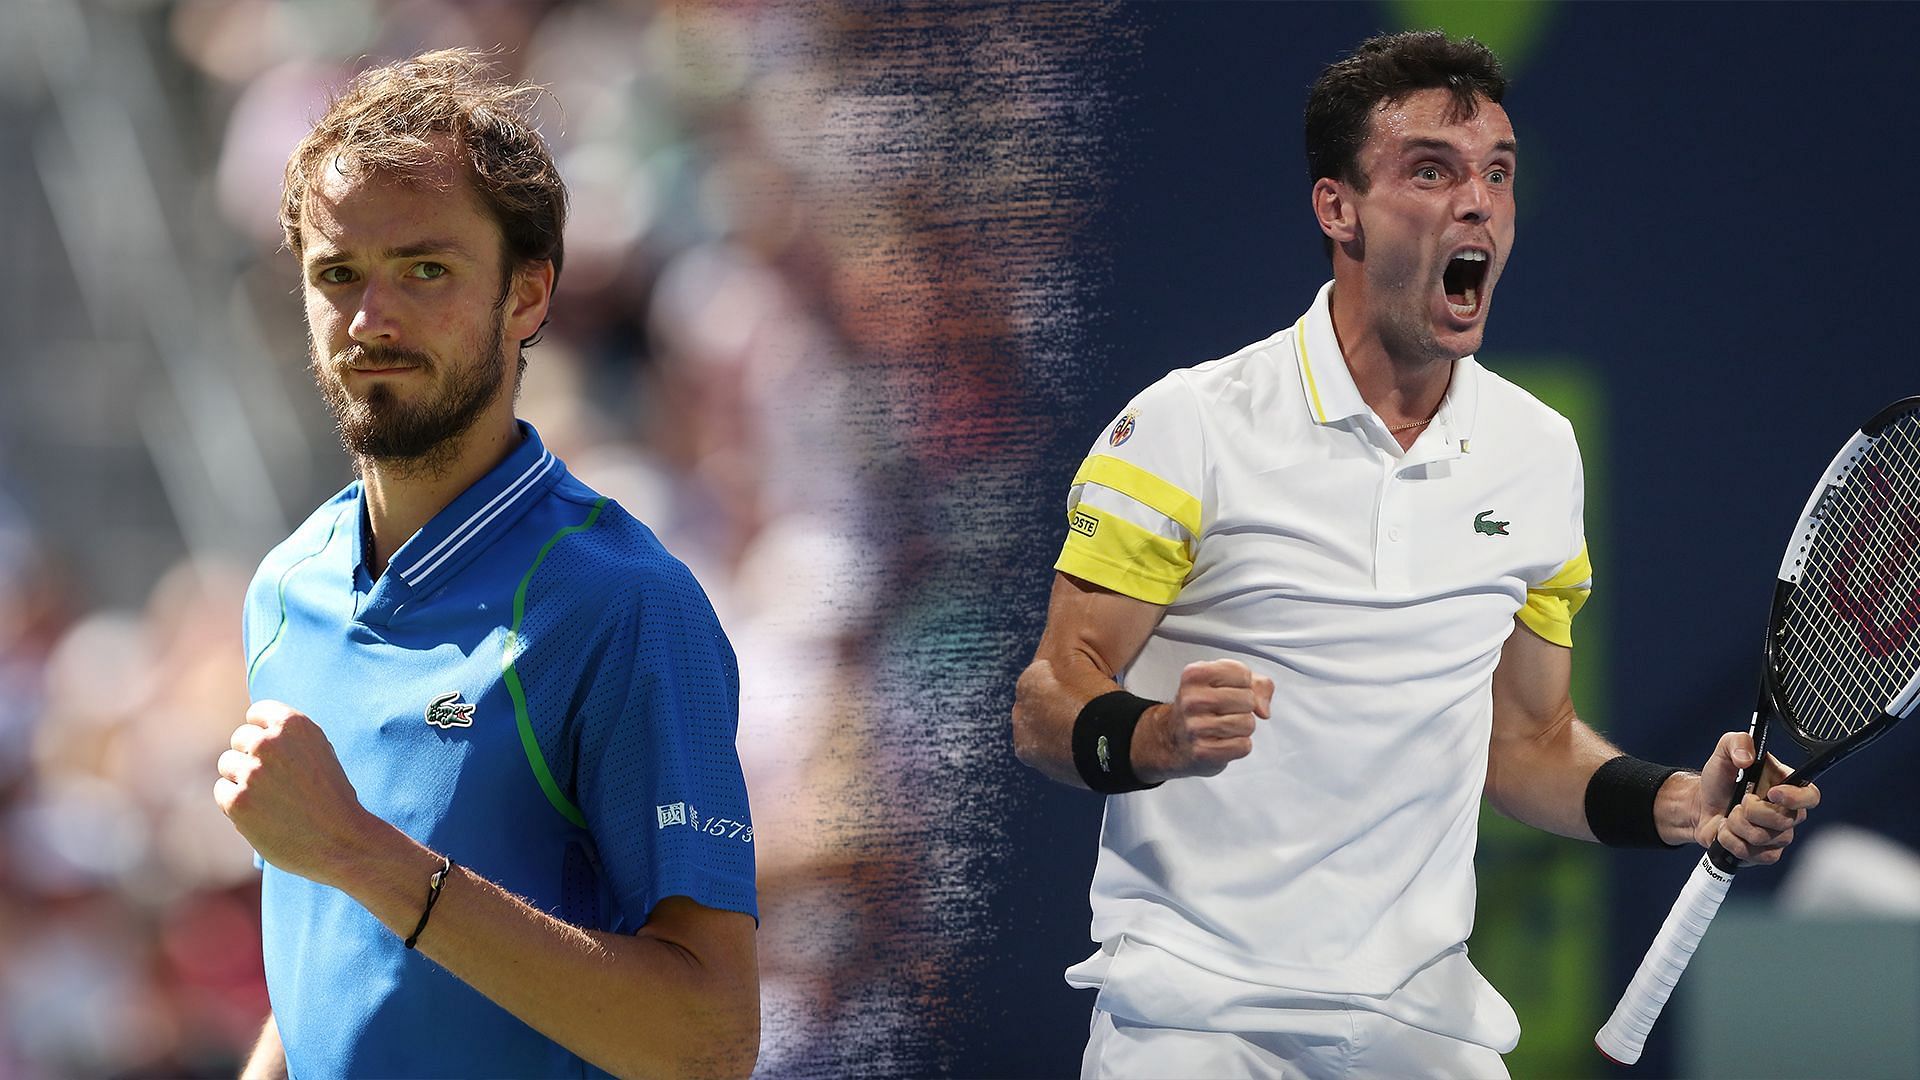 Daniil Medvedev vs Roberto Bautista Agut will be one of the quarterfinal matches at Halle.